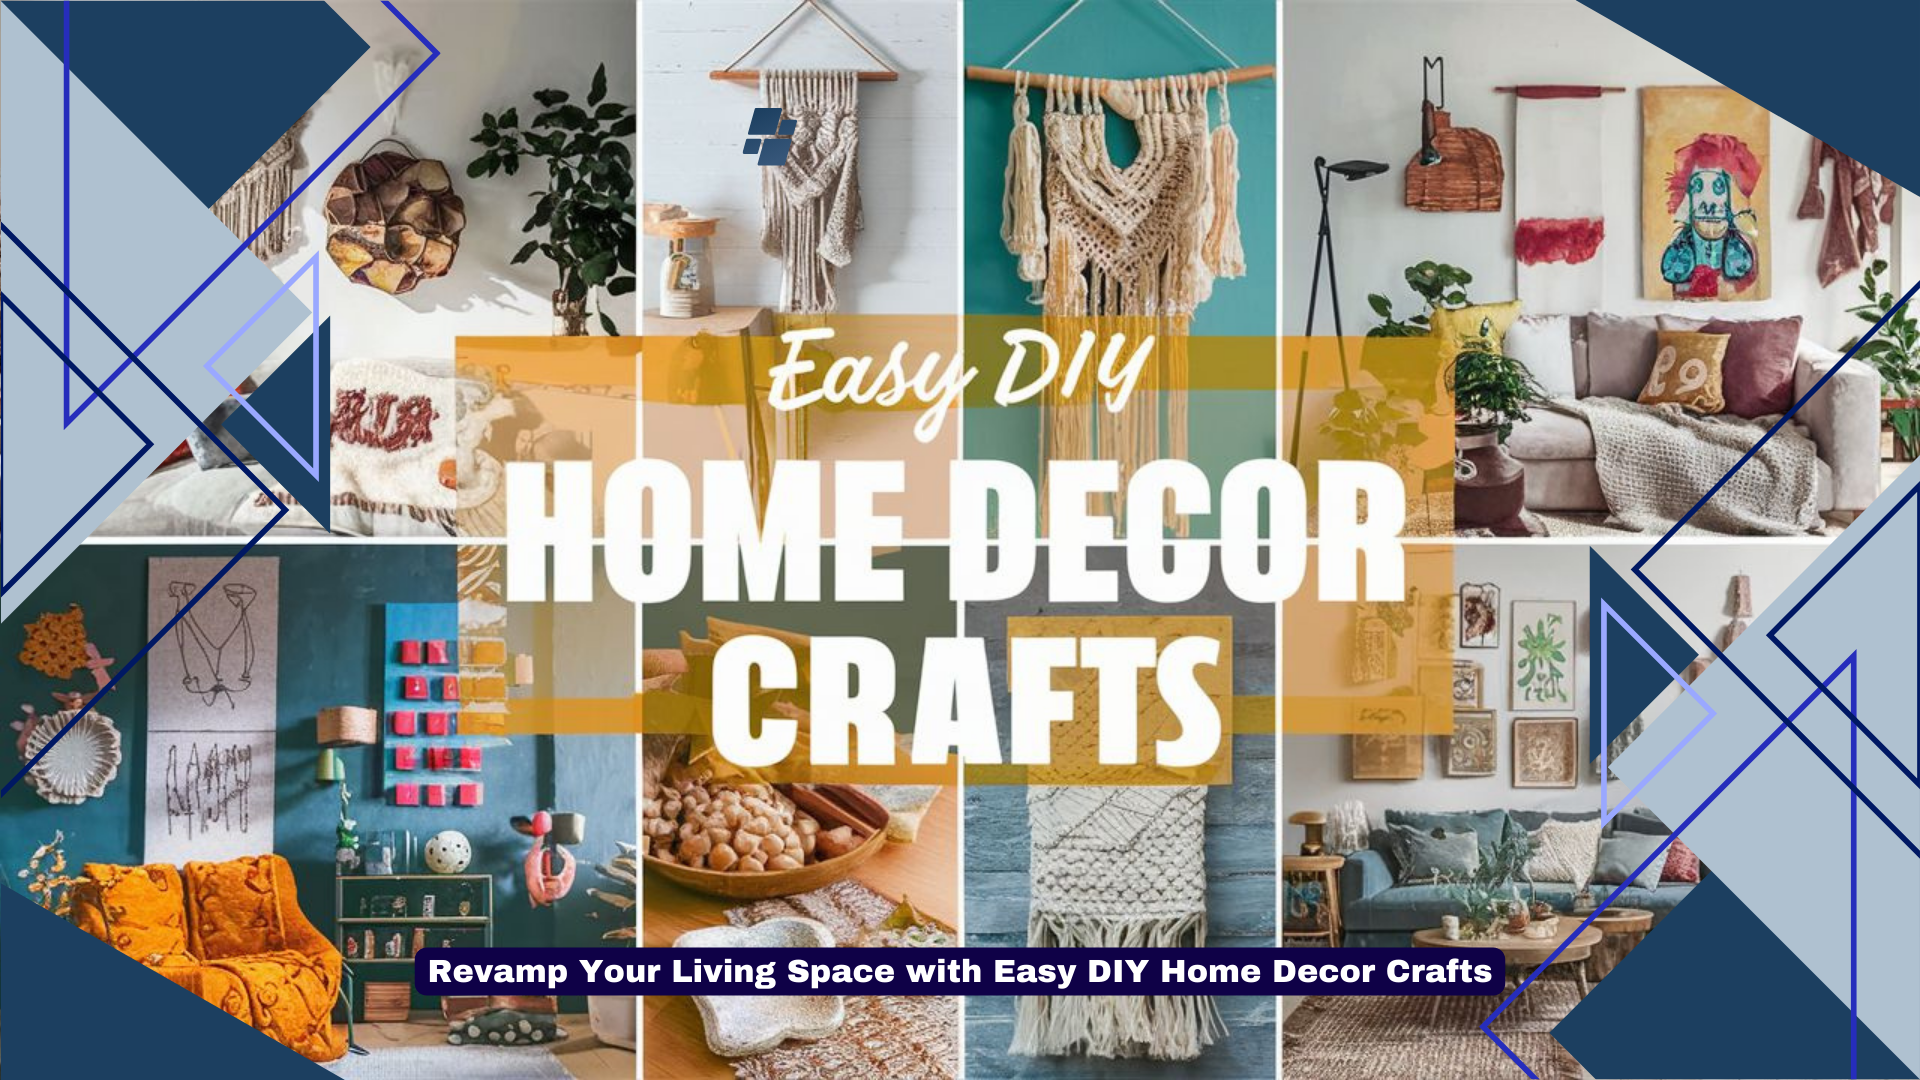 Revamp Your Living Space with Easy DIY Home Decor Crafts